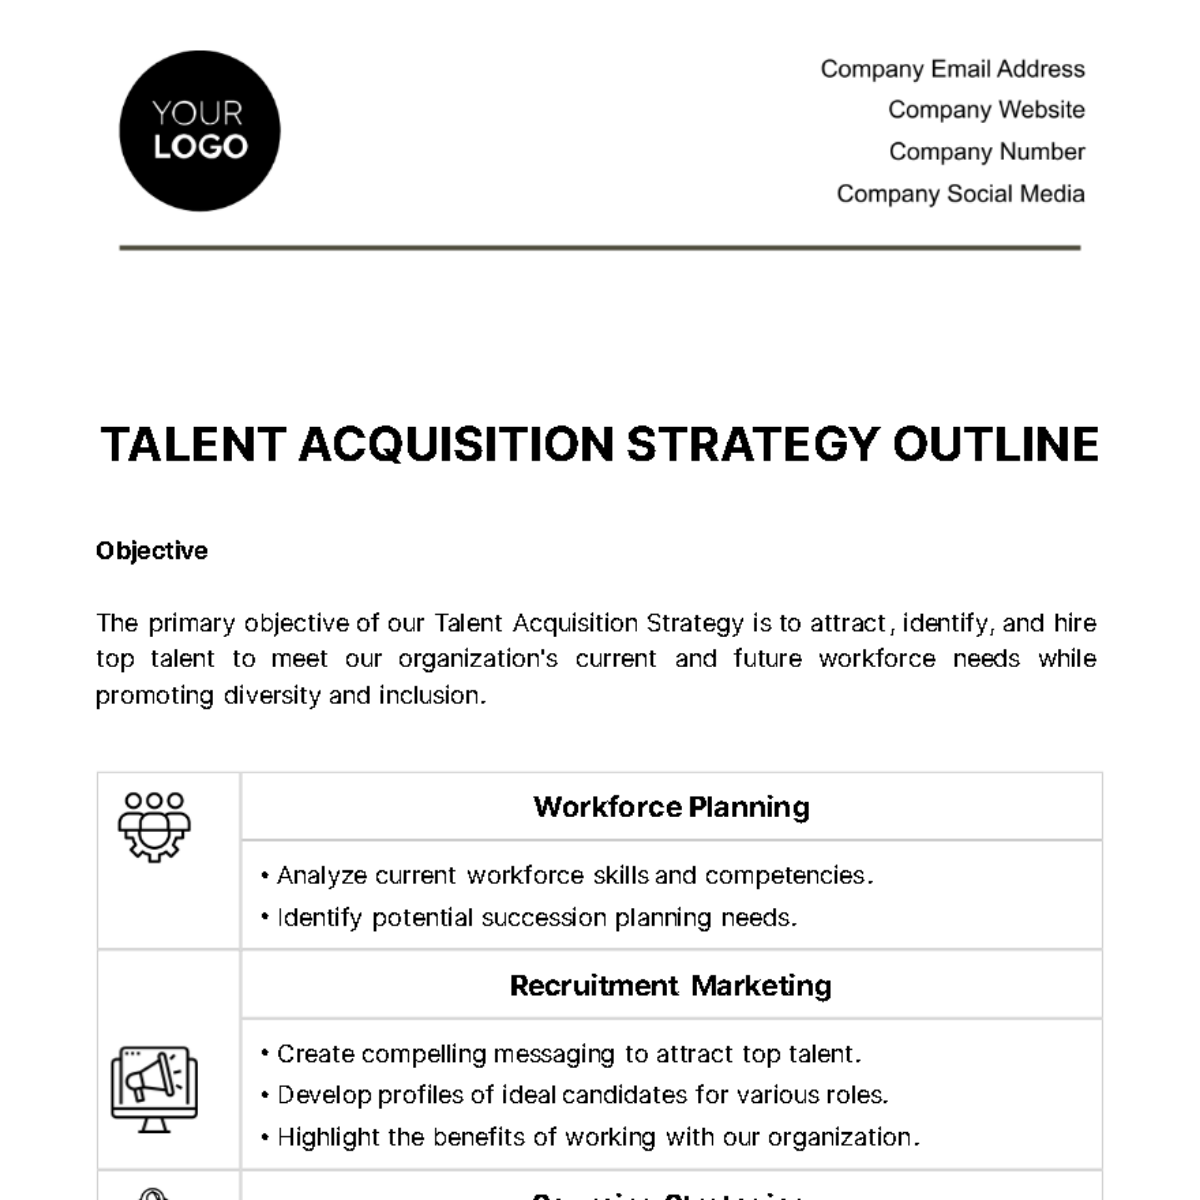 Talent Acquisition Strategy Outline HR Template